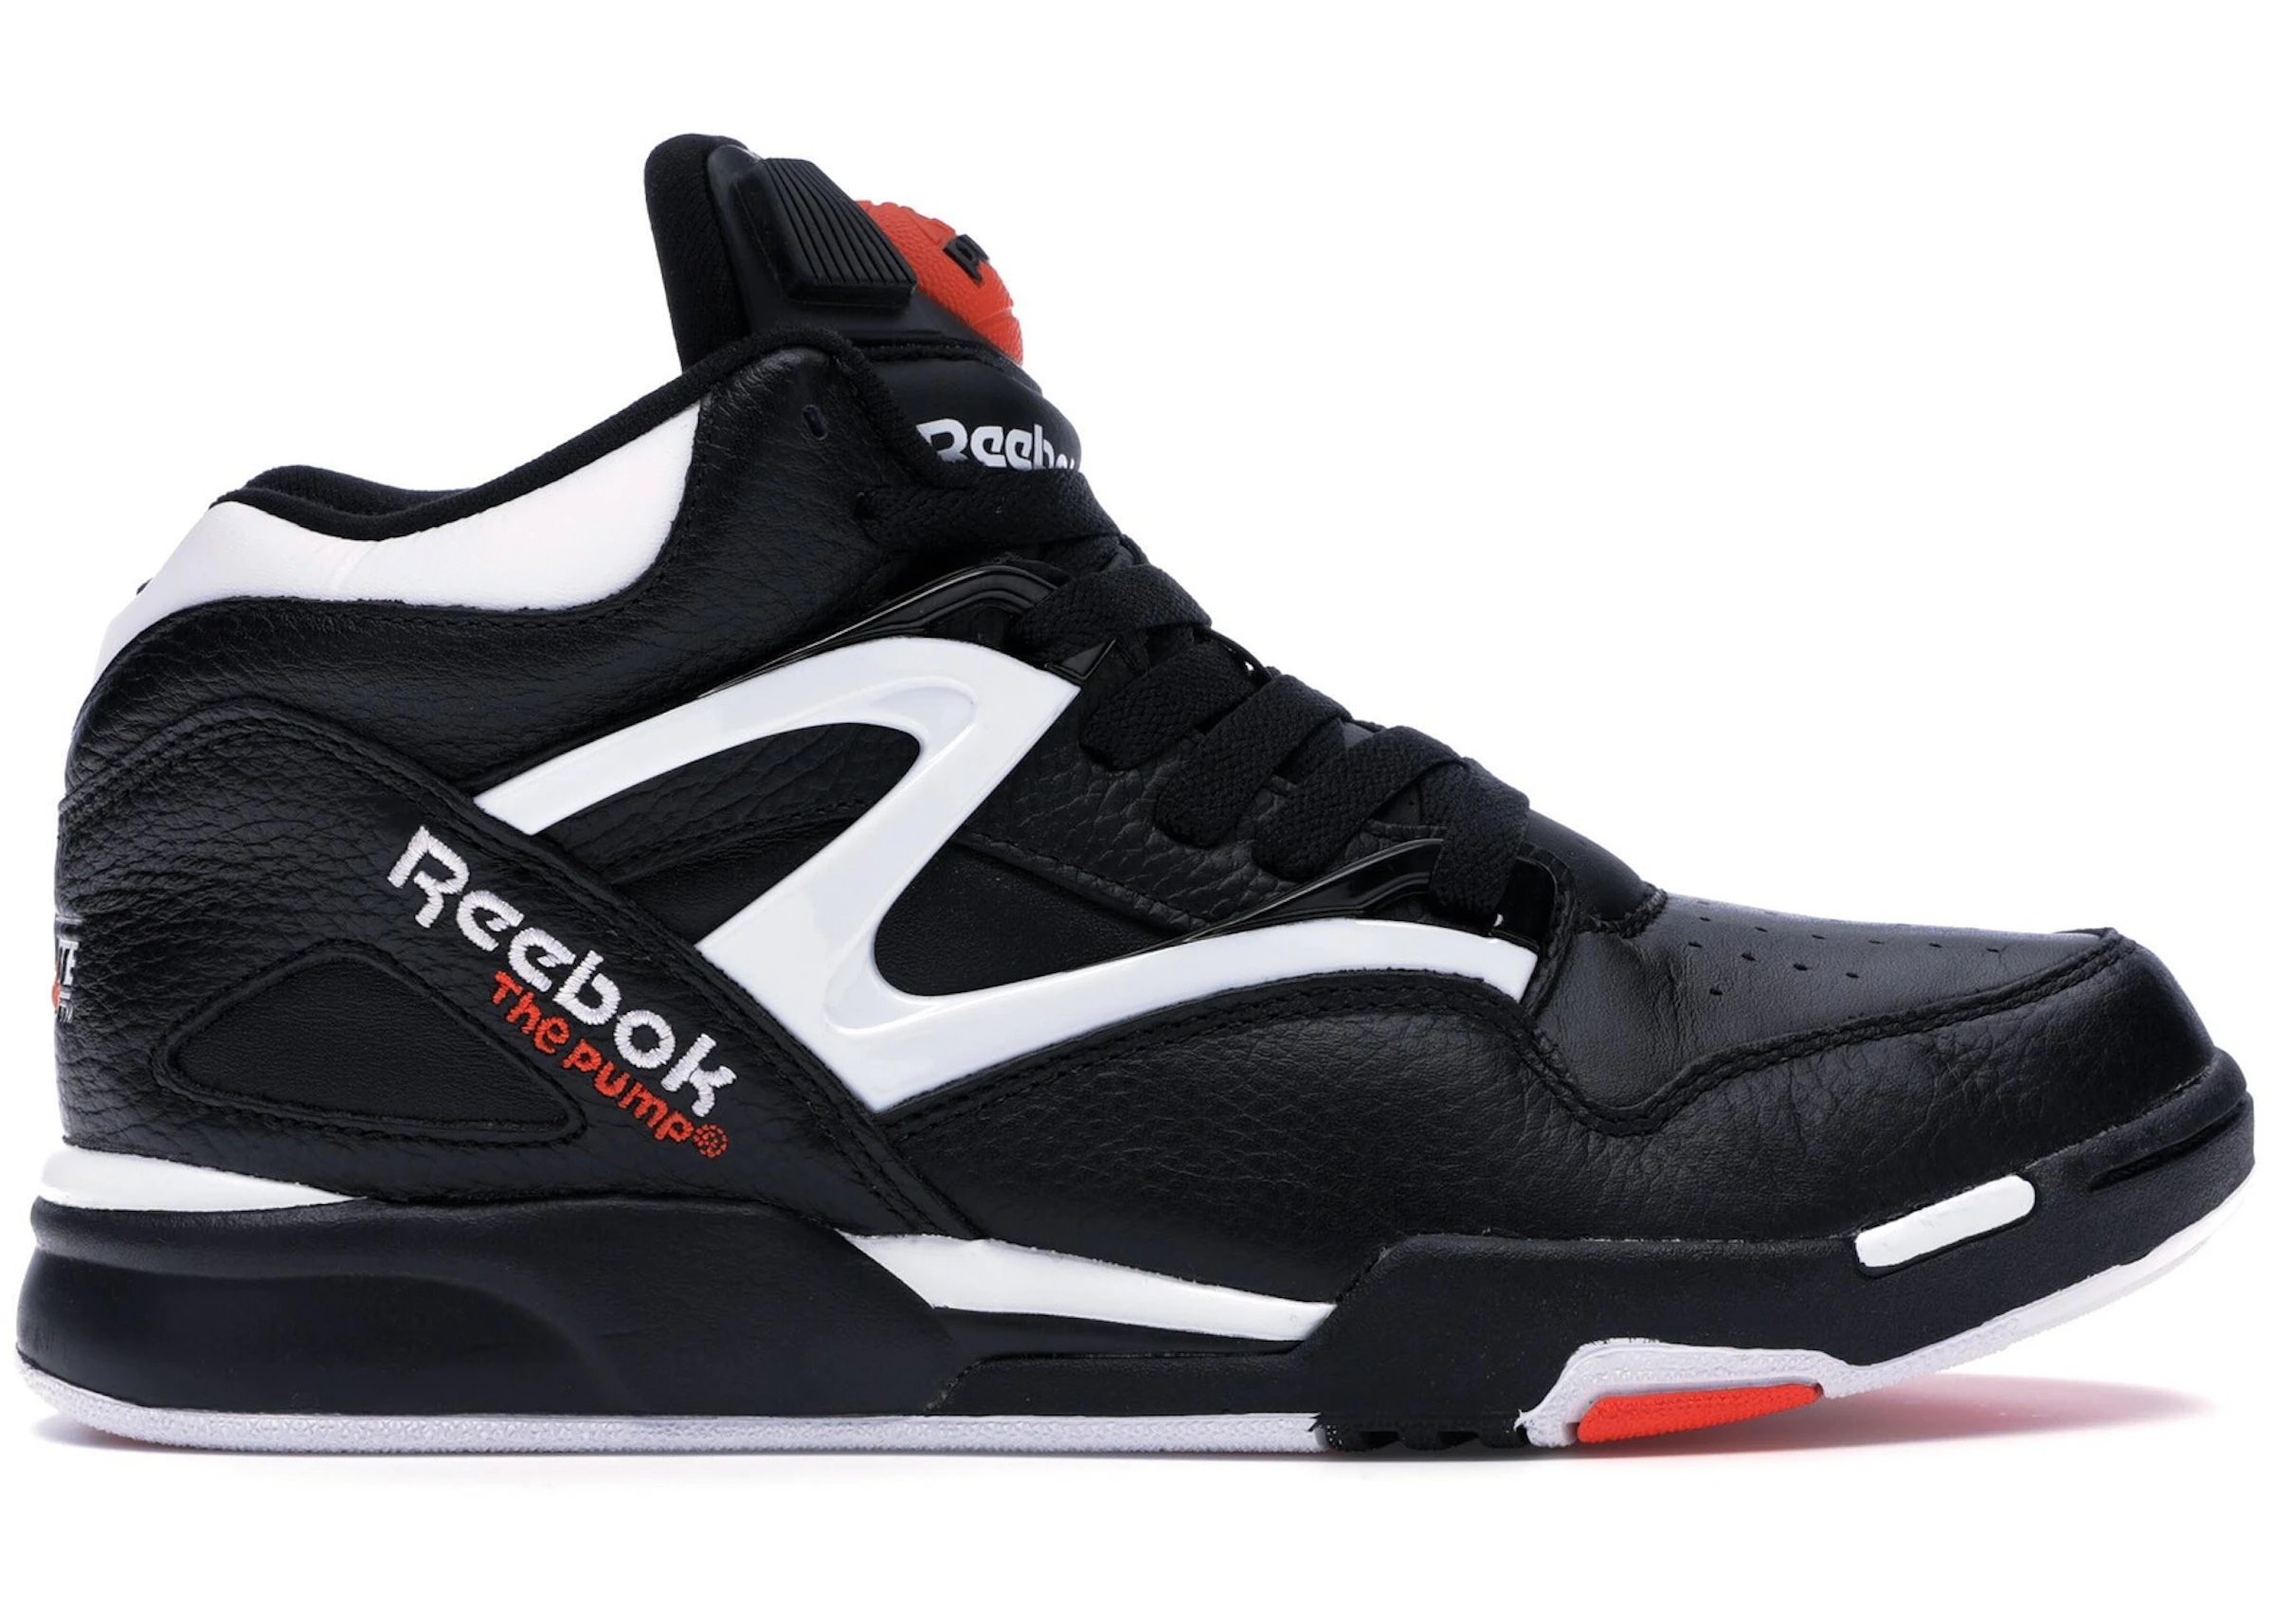 How Much Are Reebok Pumps Worth?